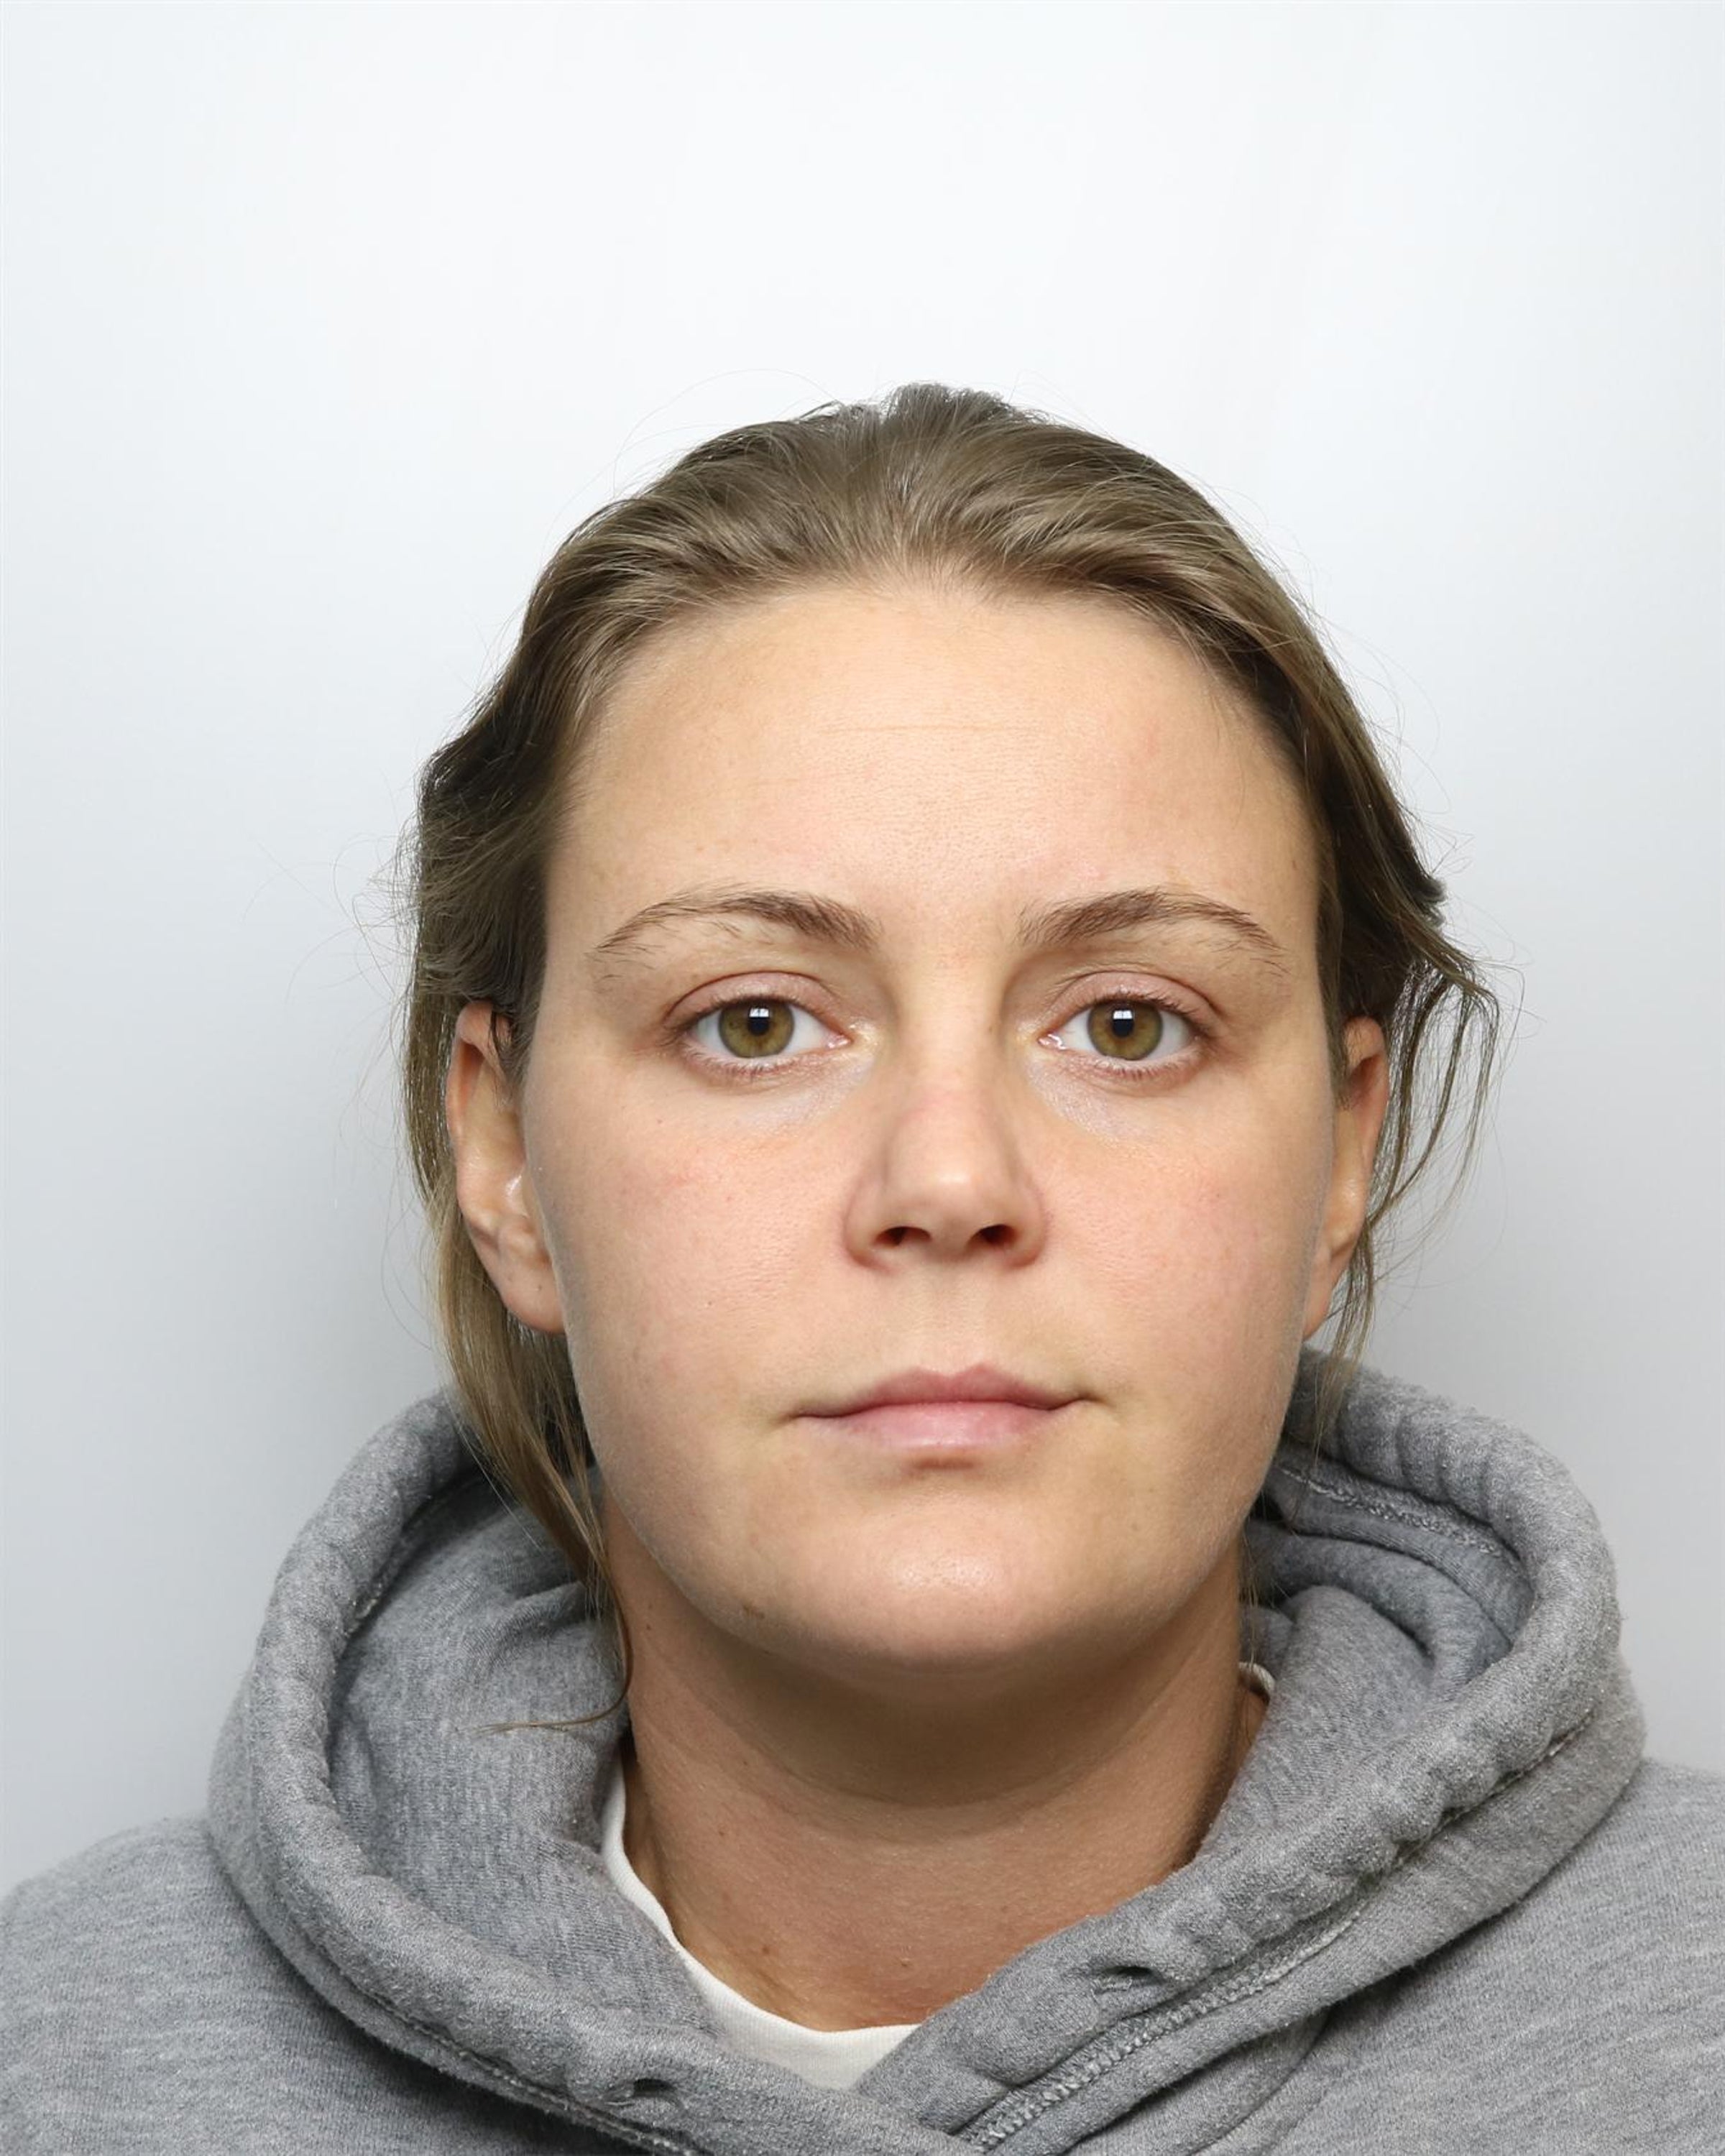 Savannah Brockhill, who was convicted of murdering Star Hobson (West Yorkshire Police/PA)